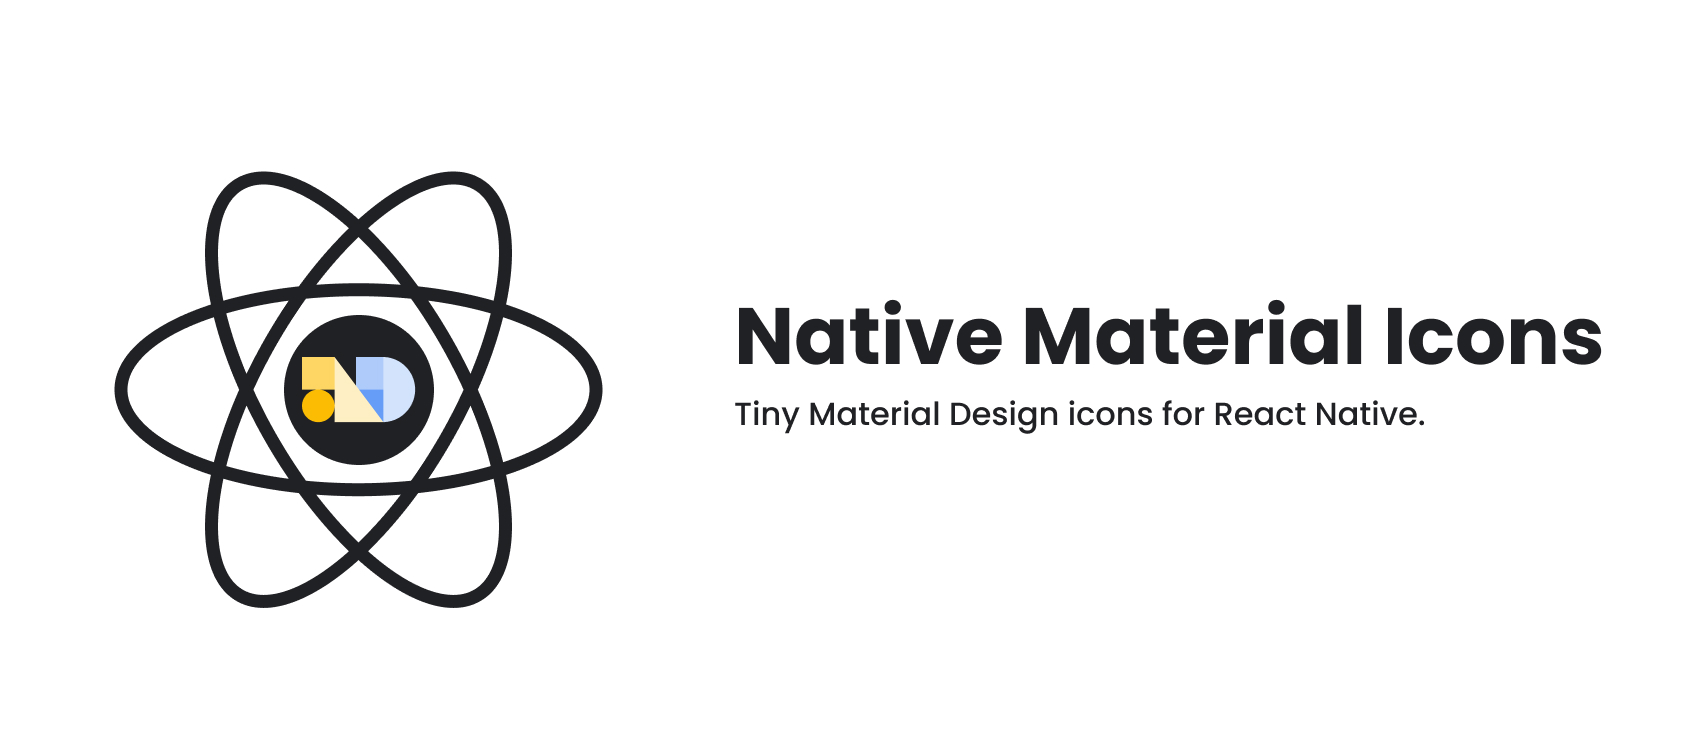 Native Material Icons - Tiny Material Design icons for React Native.